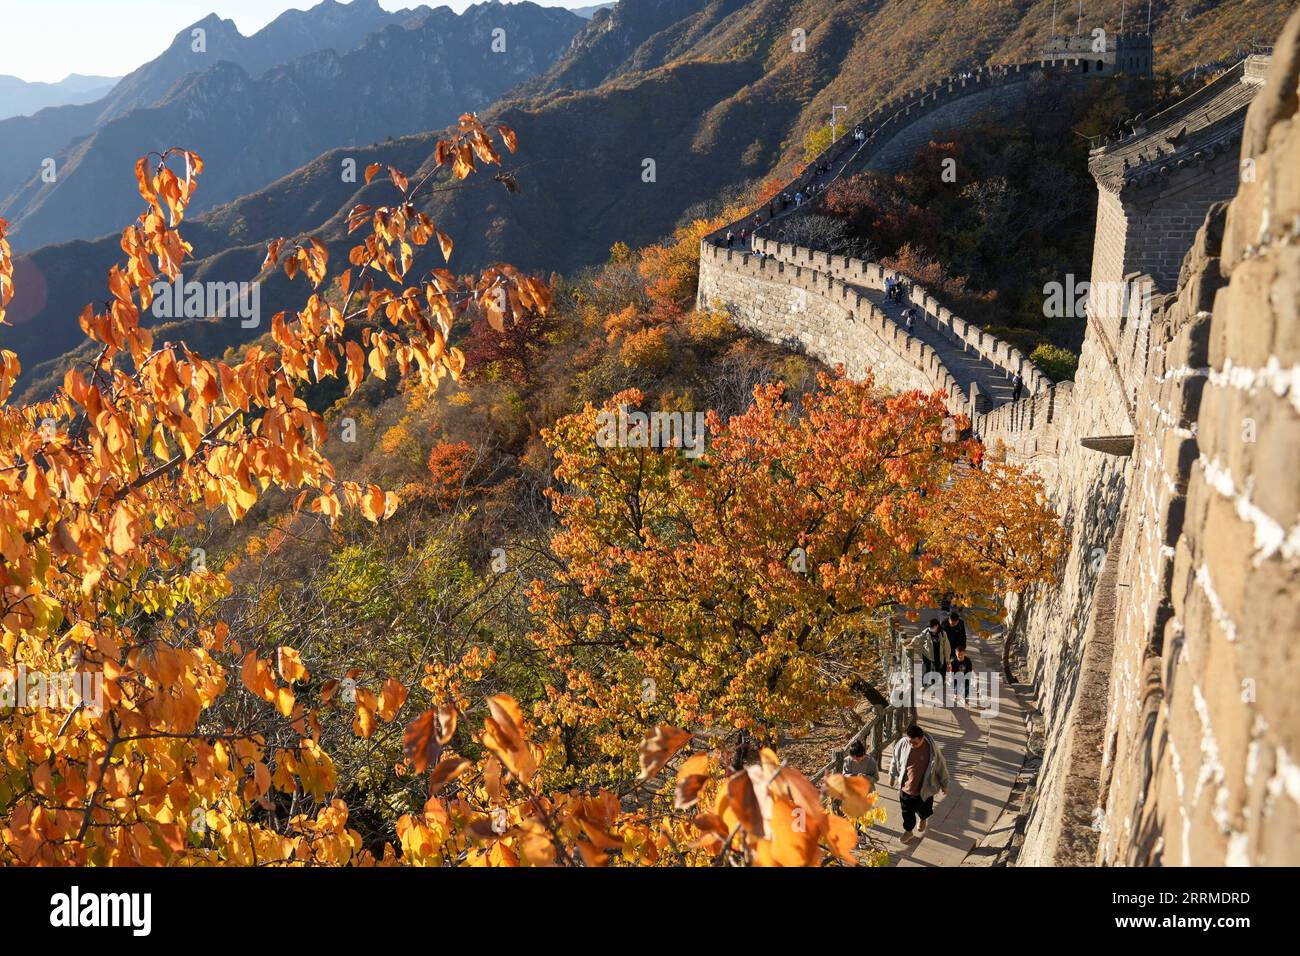 221023 -- BEIJING, Oct. 23, 2022 Xinhua -- Tourists visit the Mutianyu section of the Great Wall in Beijing, capital of China, Oct. 22, 2022. Xinhua/Ju Huanzong Beijing CHINA Weather & Environment conservation & Disasters & Accidents xx *** 221023 BEIJING, Oct 23, 2022 Xinhua Tourists visit the Mutianyu section of the Great Wall in Beijing, capital of China, Oct 22, 2022 Xinhua Ju Huanzong Beijing CHINA Weather Environment conservation Disasters Accidents xx, PUBLICATIONxNOTxINxDENxNORxSWExFIN Copyright: xJuxHuanzongx CHINA-BEIJING-GREAT WALL-MUTIANYU CN Stock Photo